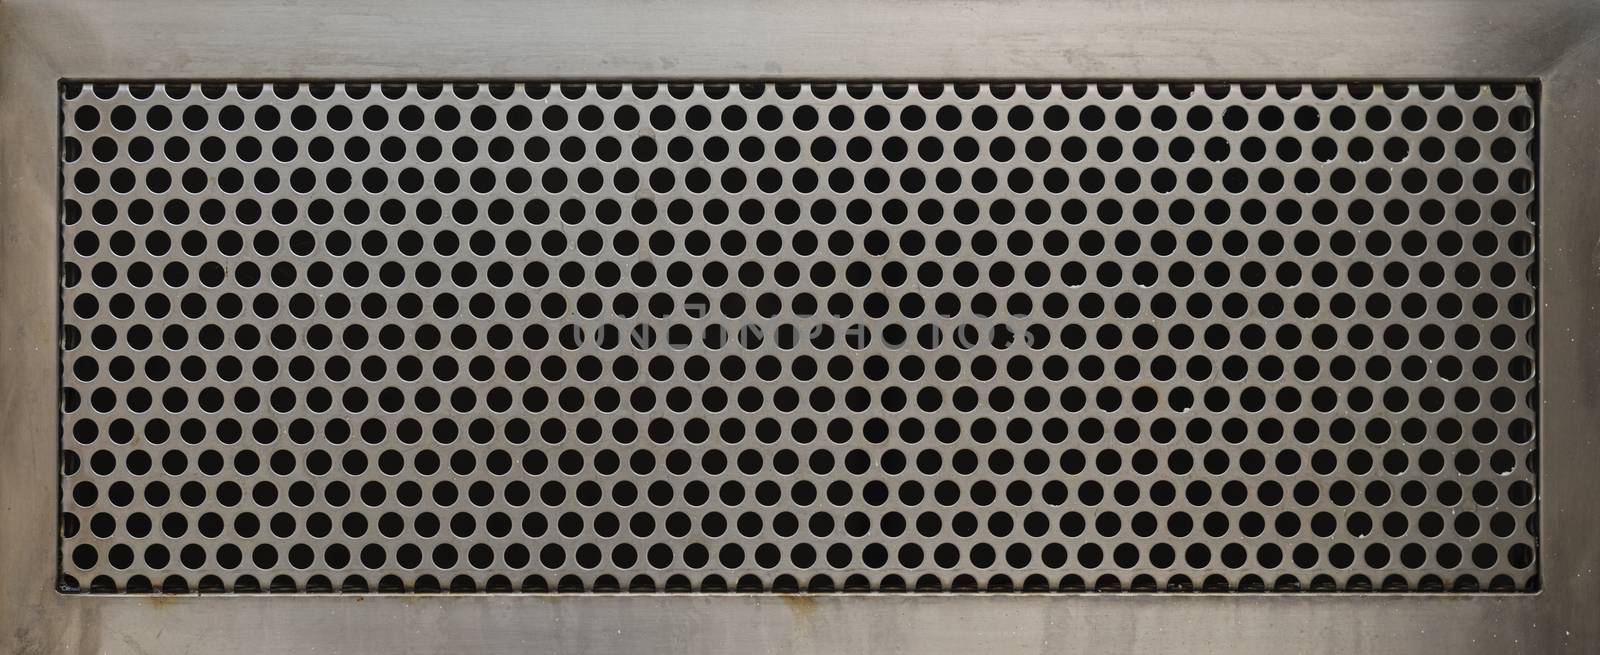 Perforated metal plate by cherezoff